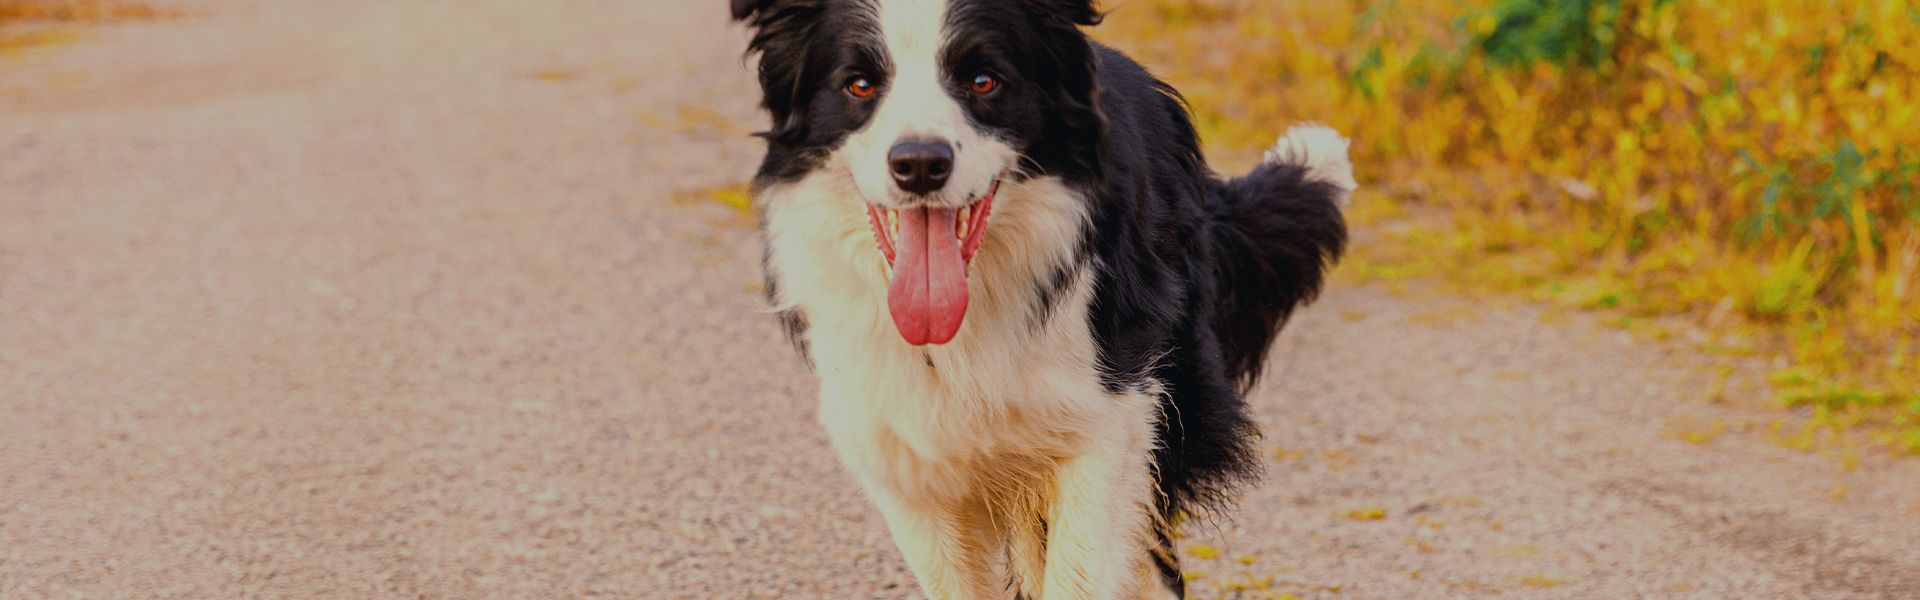 smiling border collie dog at the park